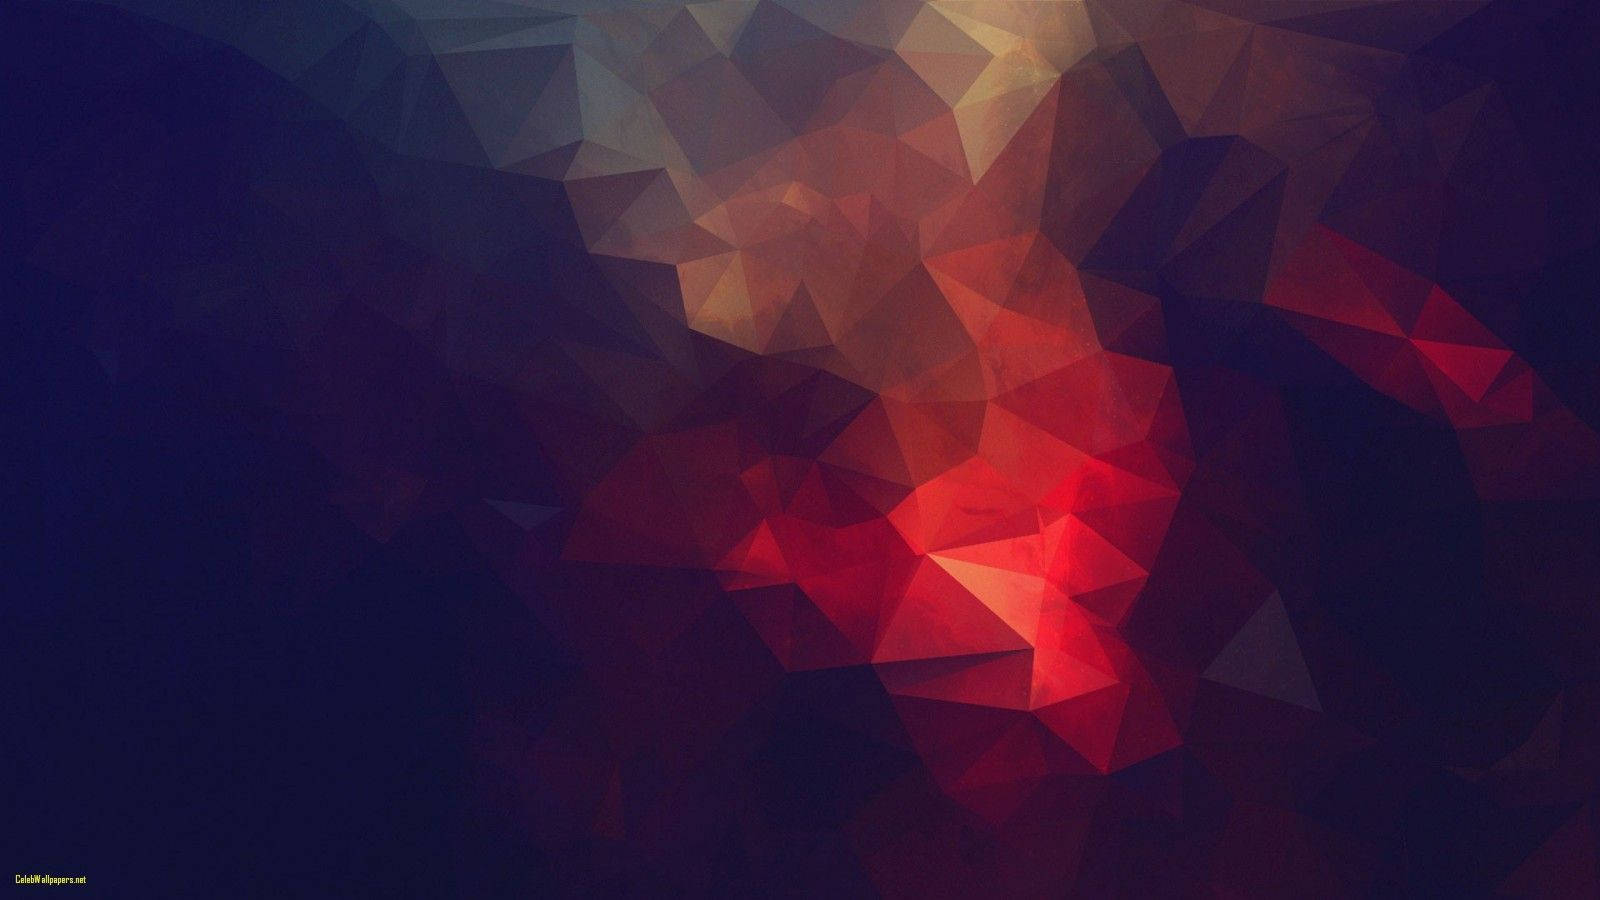 Free Low Poly Wallpaper Downloads, [100+] Low Poly Wallpapers for FREE |  